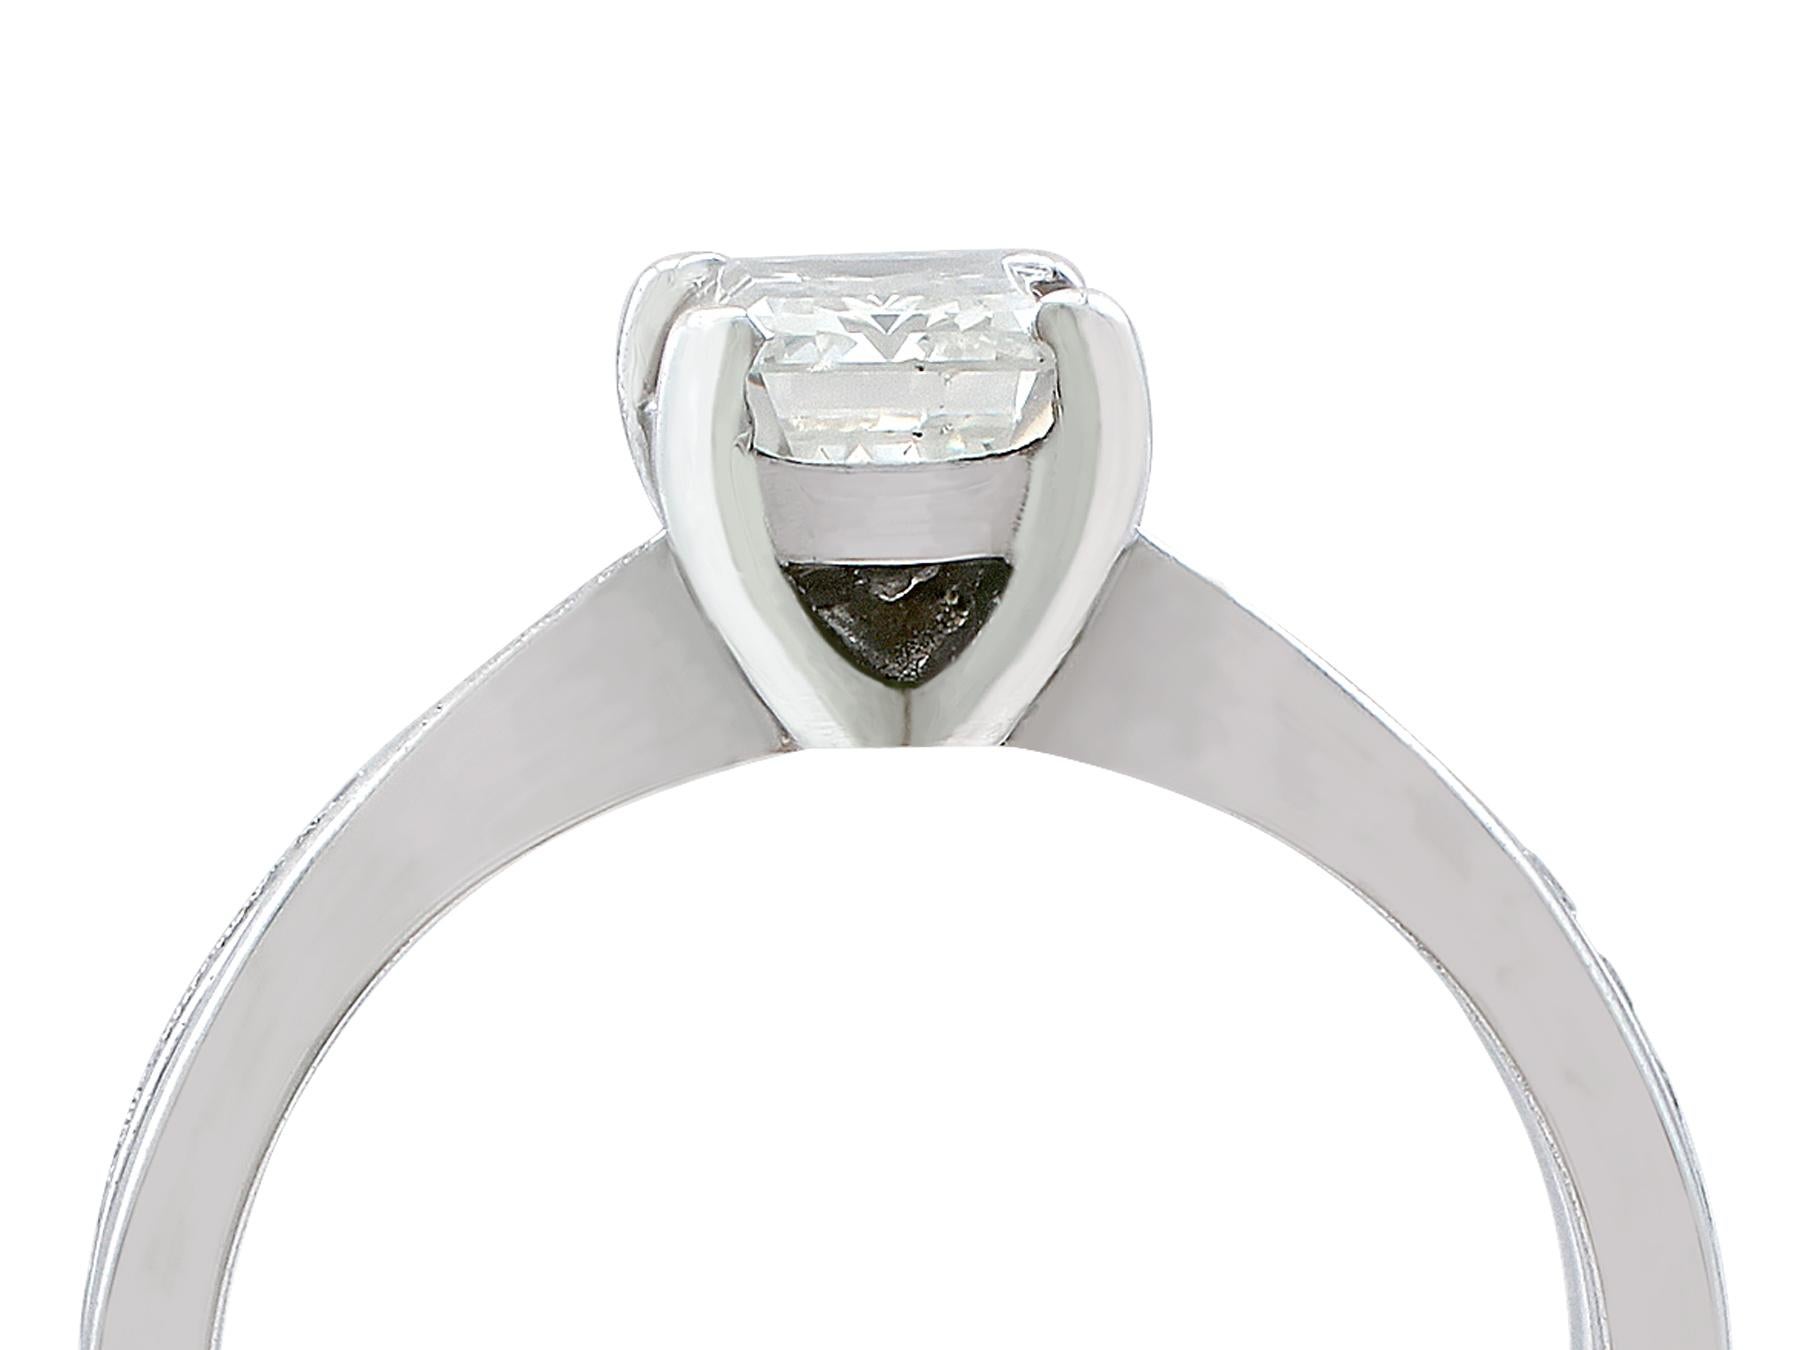 An impressive contemporary 1.02 carat diamond and platinum solitaire and eternity ring set; part of our diverse diamond jewellery and estate jewelry collections.

This fine and impressive emerald cut diamond ring and diamond band set has been